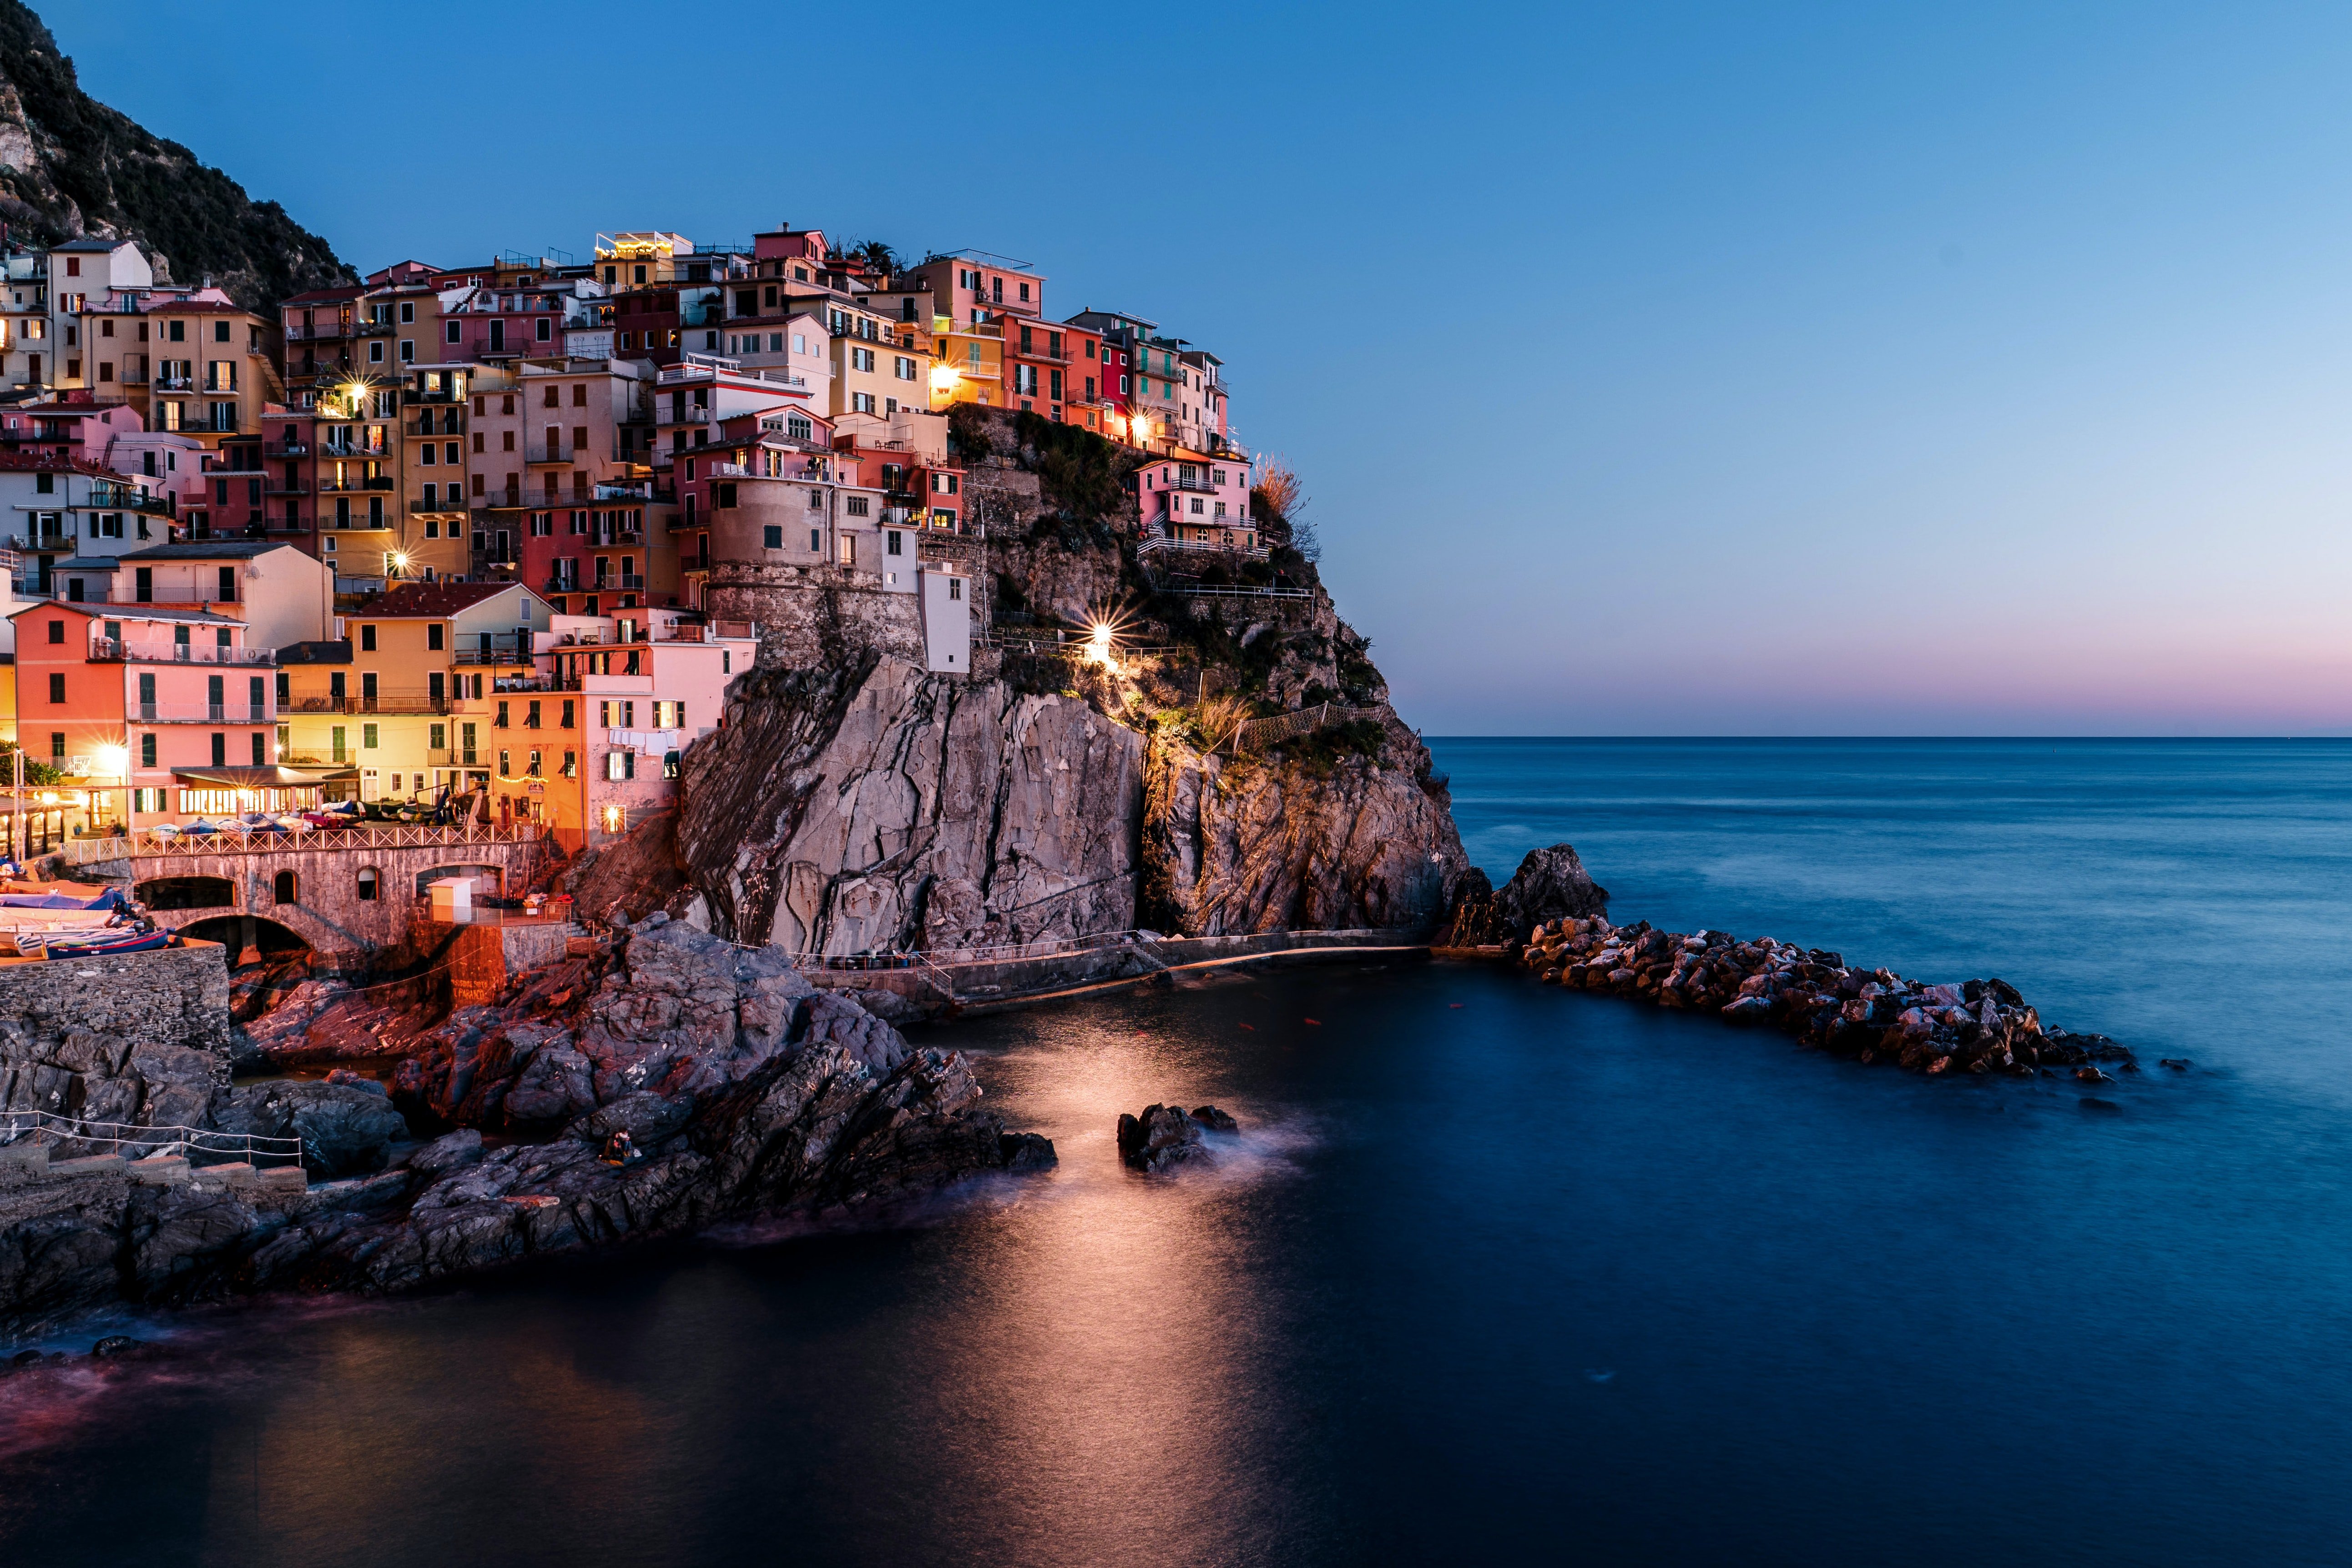 A colorful city on the coast of Italy in the evening